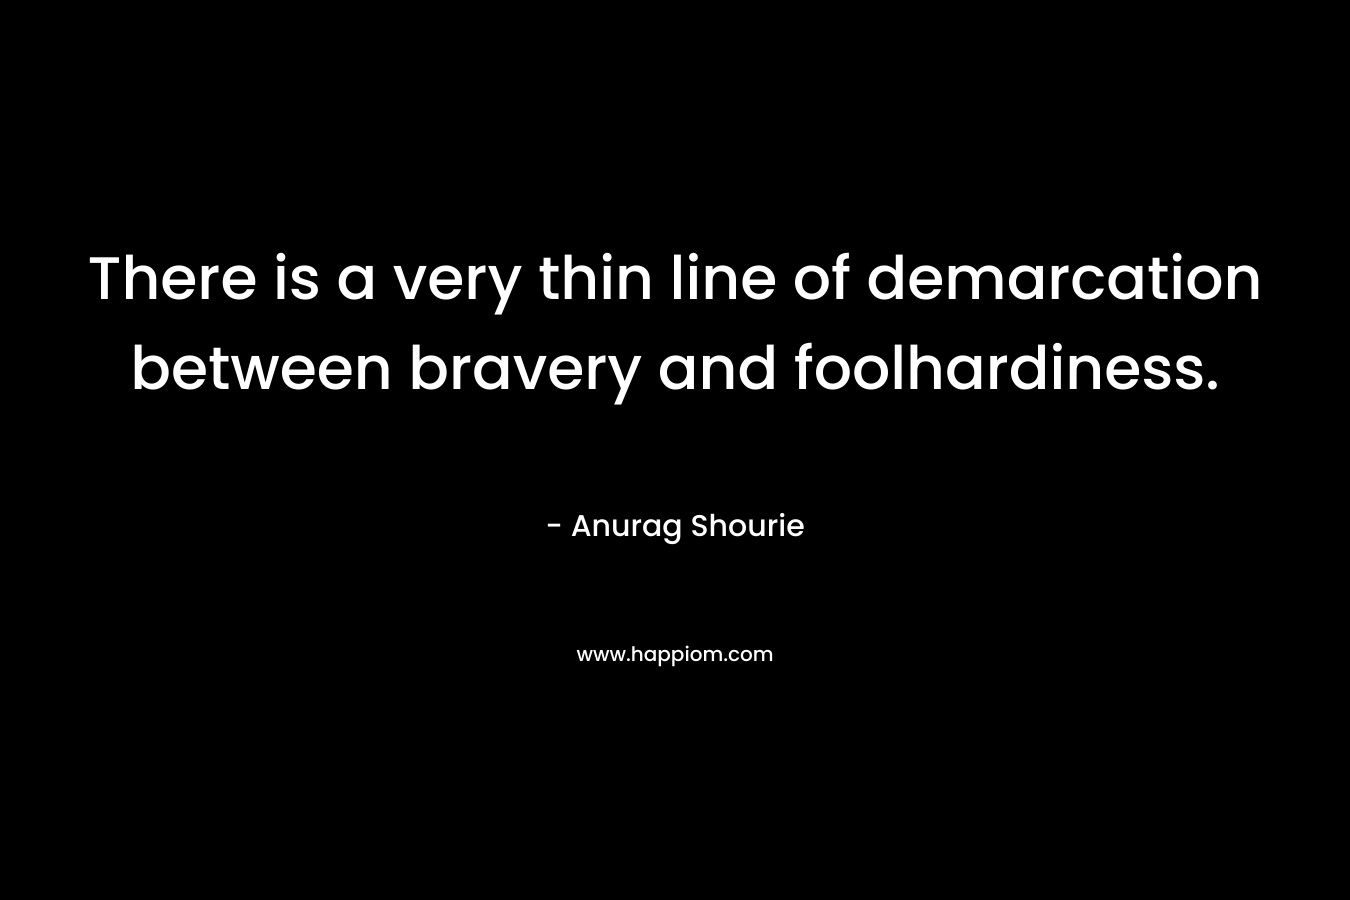 There is a very thin line of demarcation between bravery and foolhardiness. – Anurag Shourie